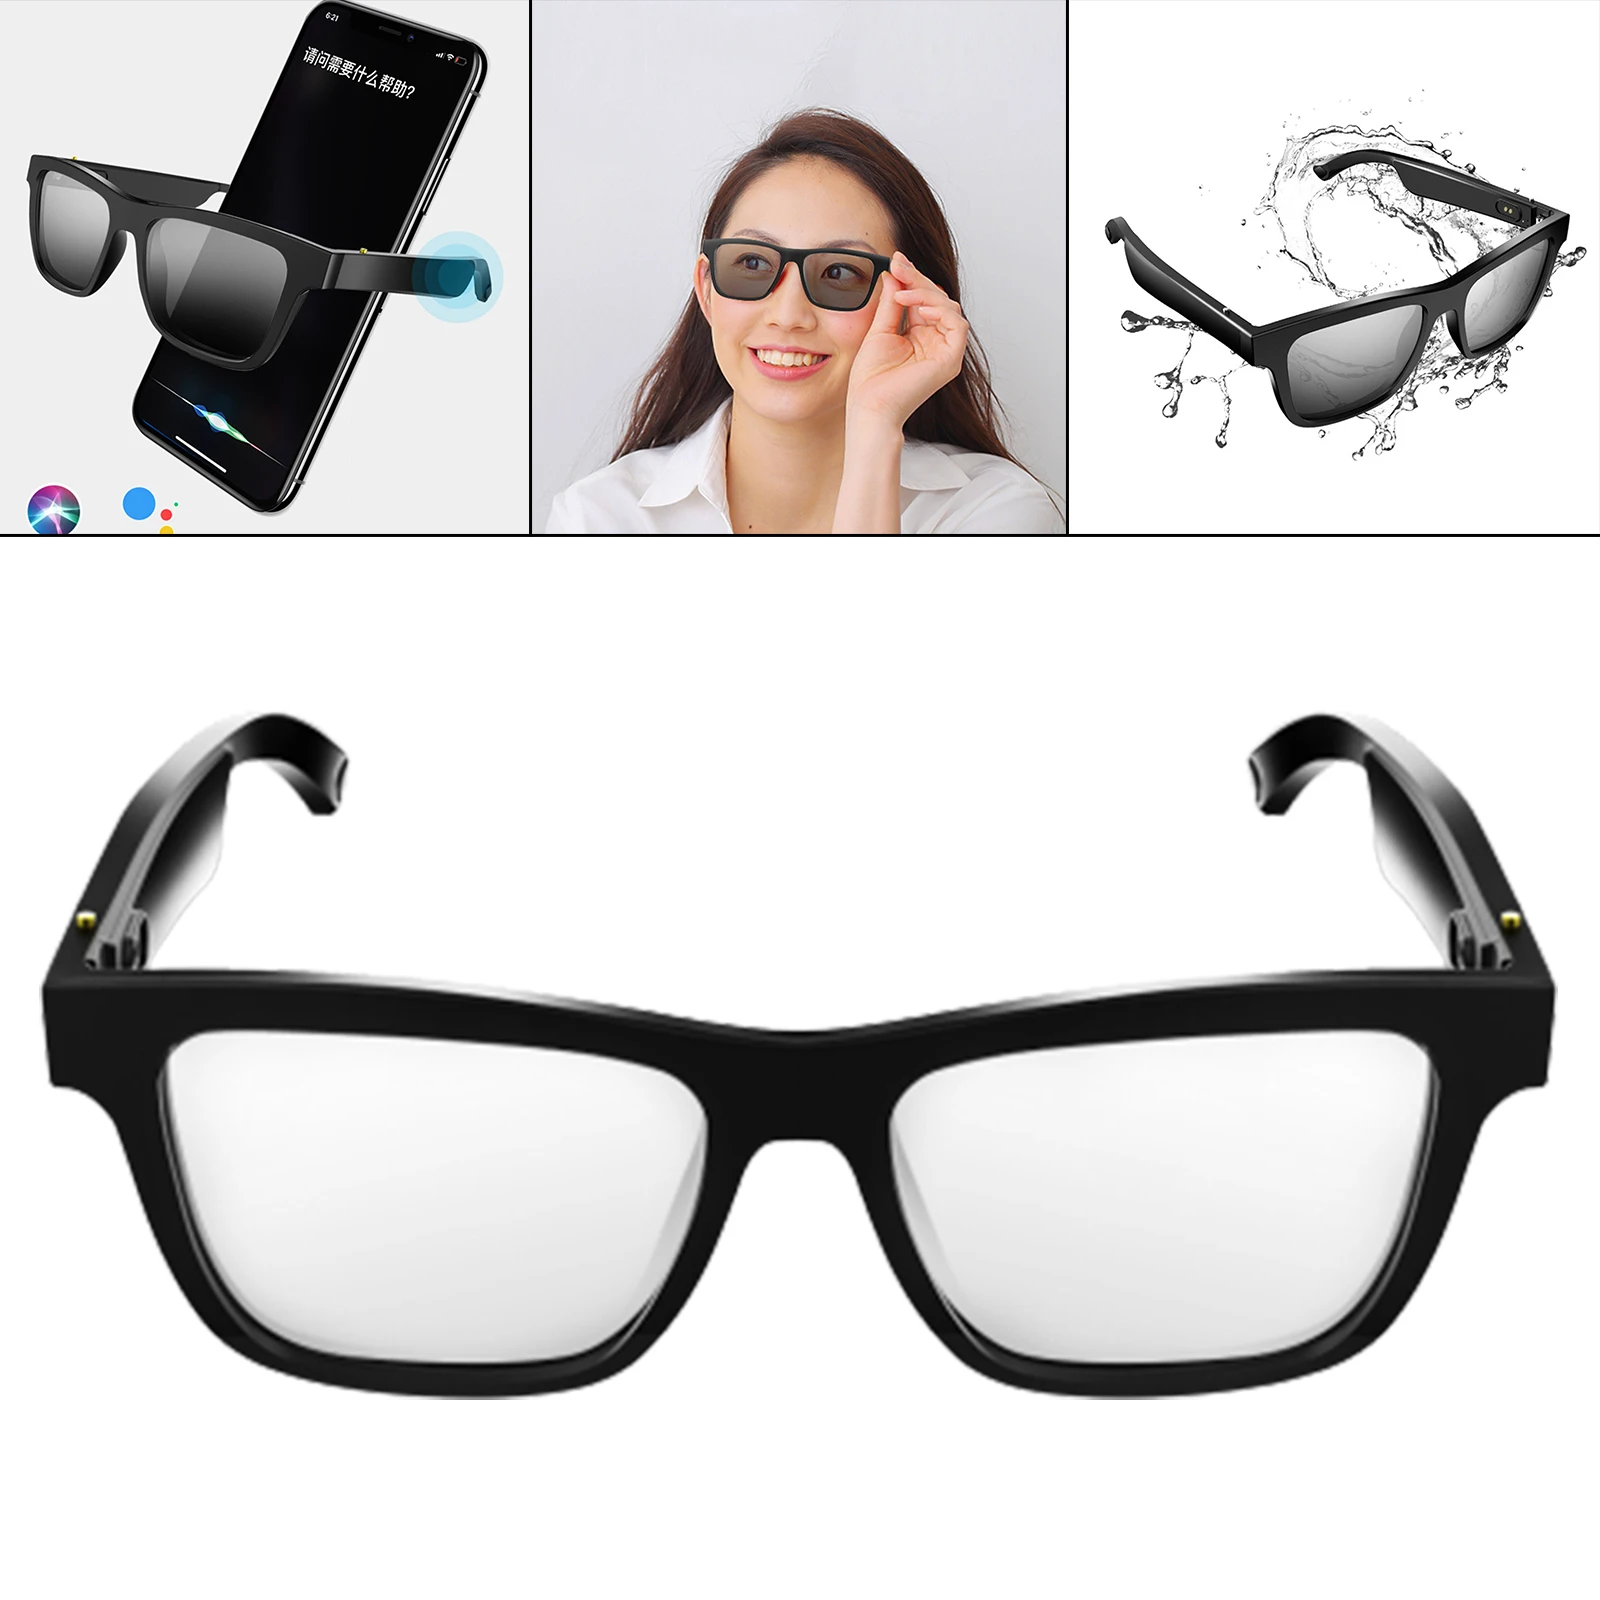 Wireless Smart Glasses with Built-in Mic Open-Ear Headphones for IOS Android for Women and Men